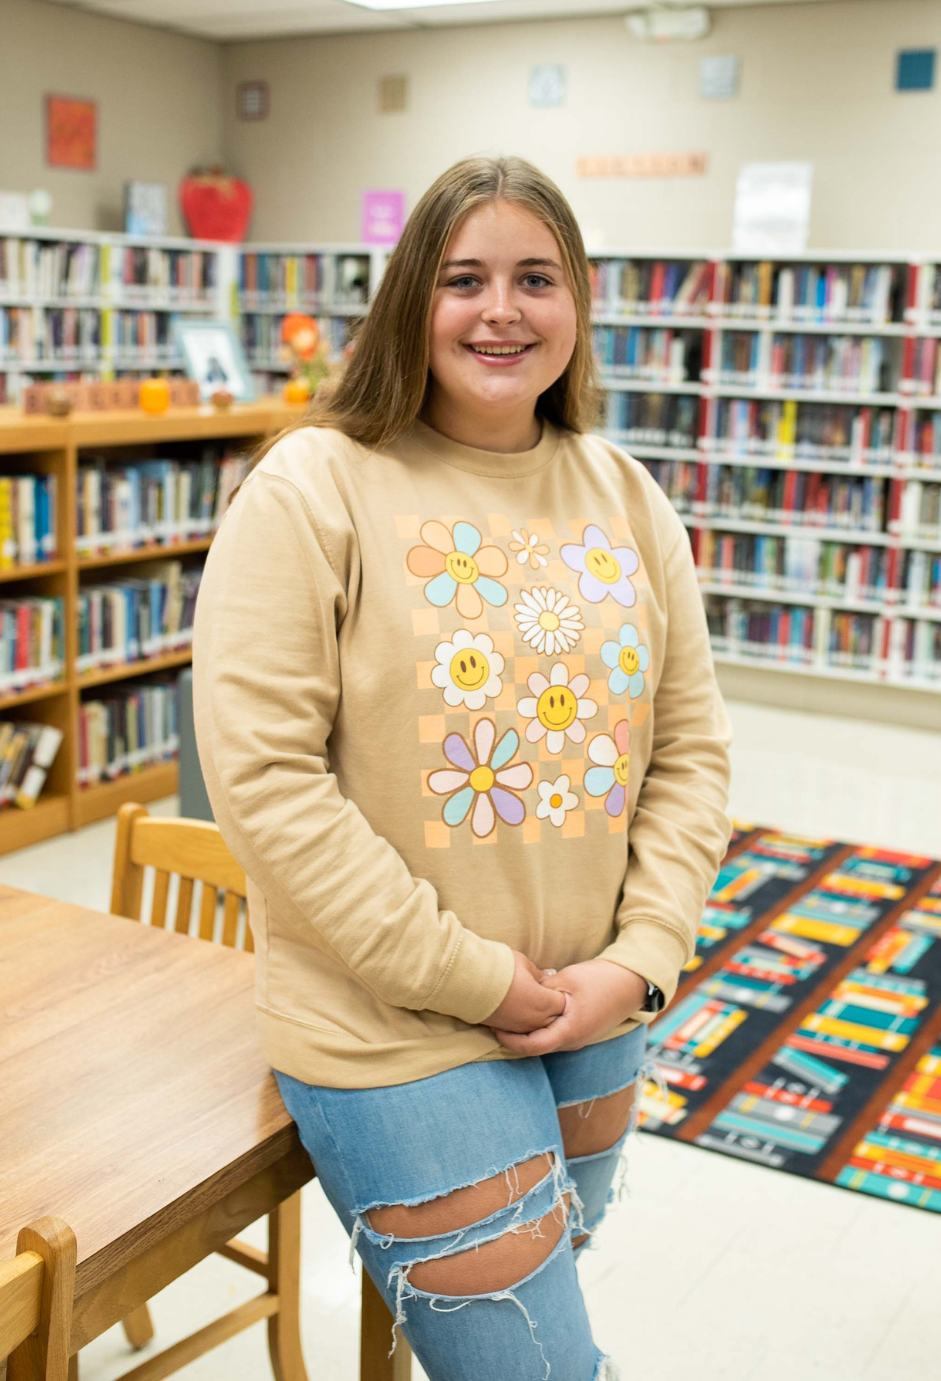 A student standing in a library.